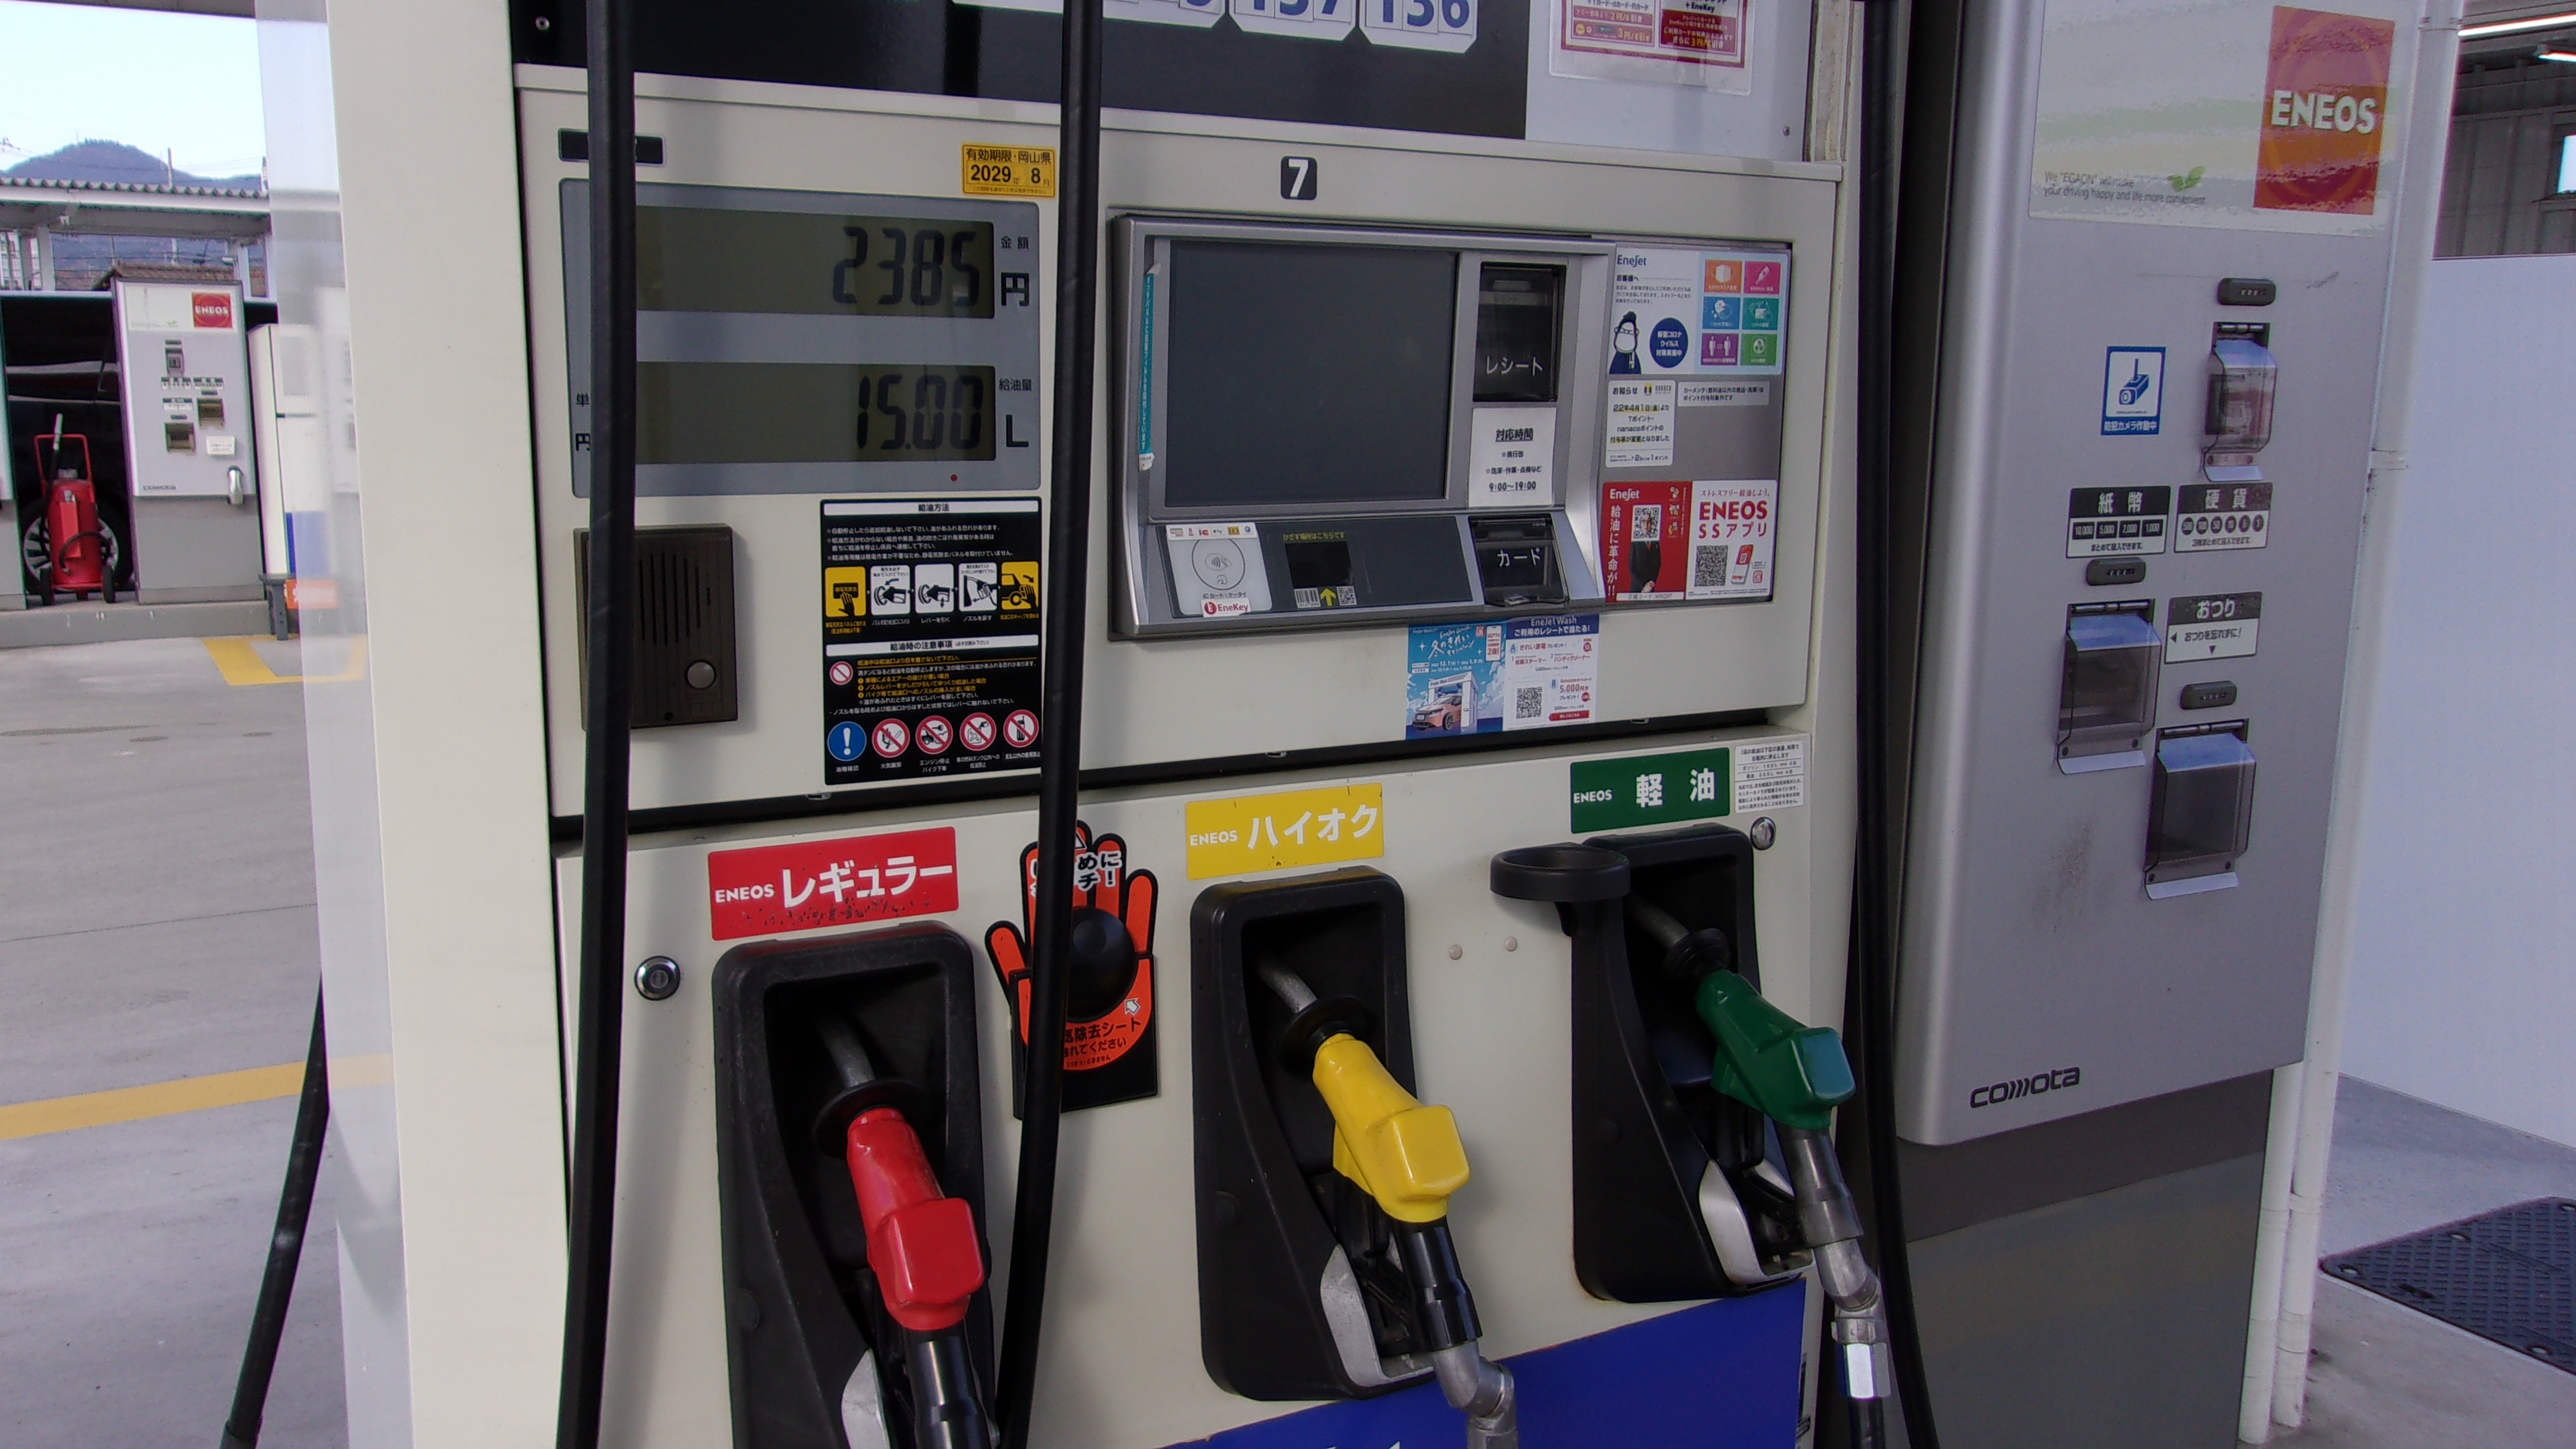 Images ENEOS Dr.Driveセルフ総社店(ENEOSフロンティア)